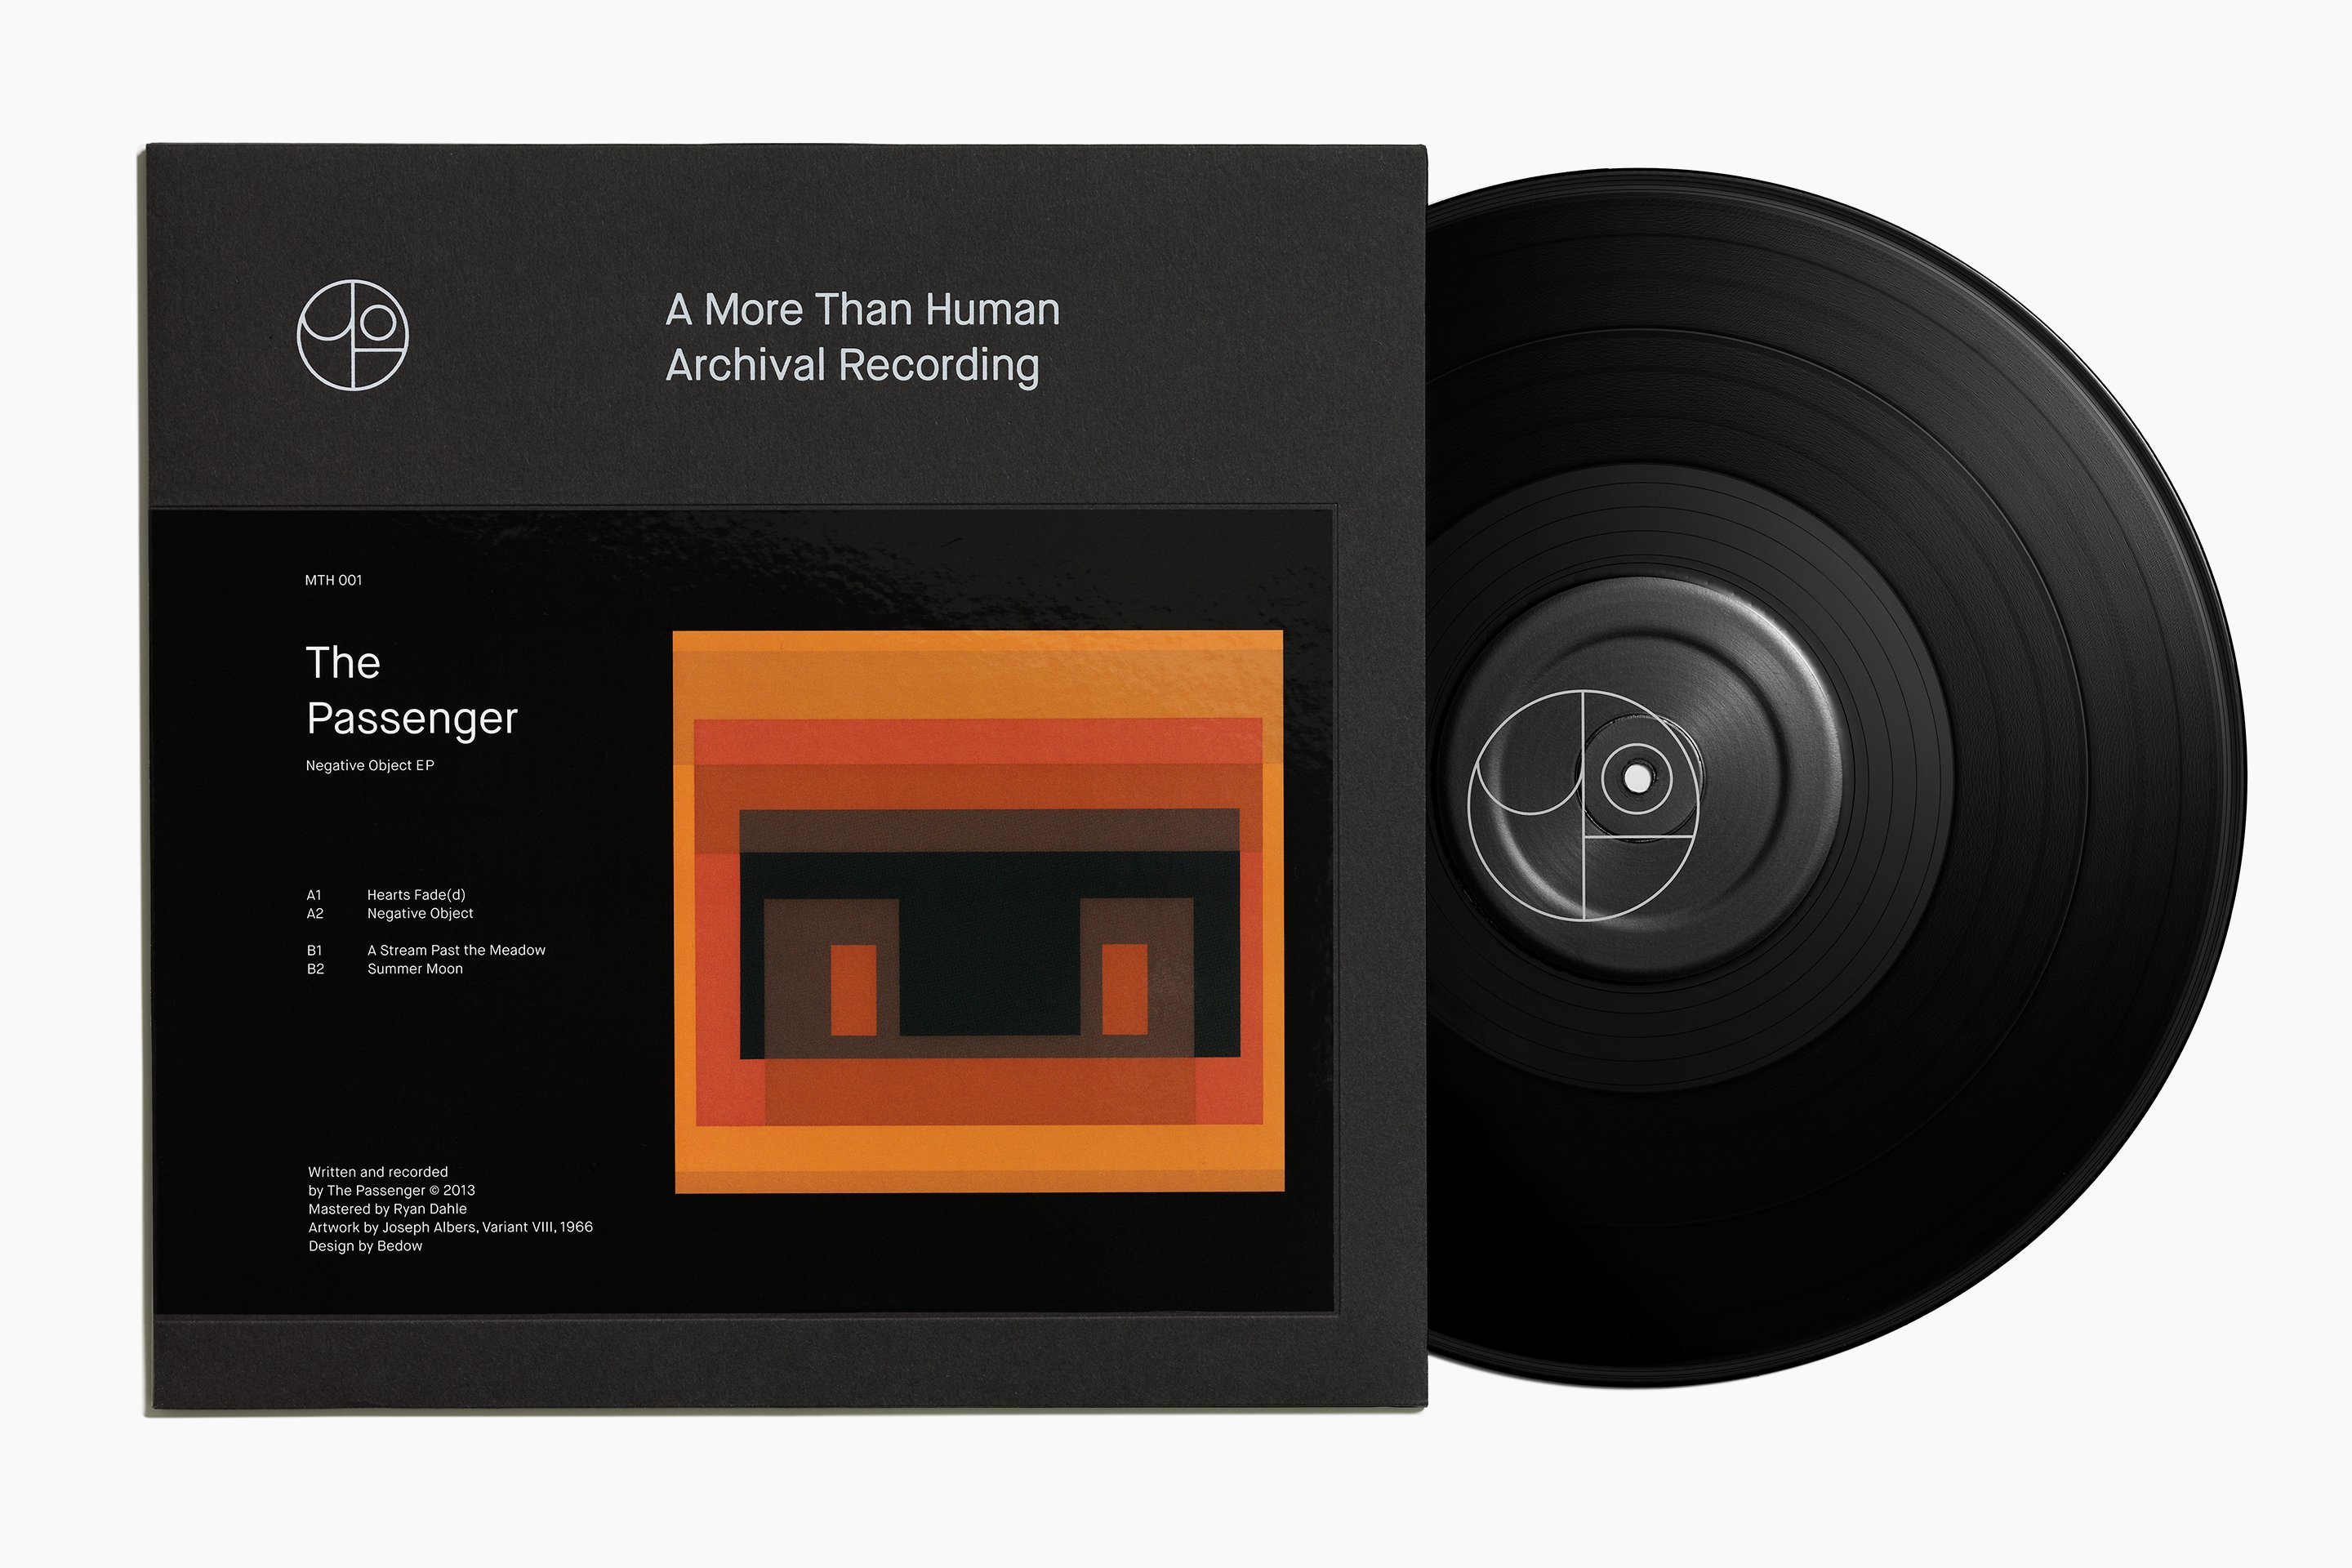 Logo and record label design featuring artwork from Joseph Albers for Canadian record label More Than Human